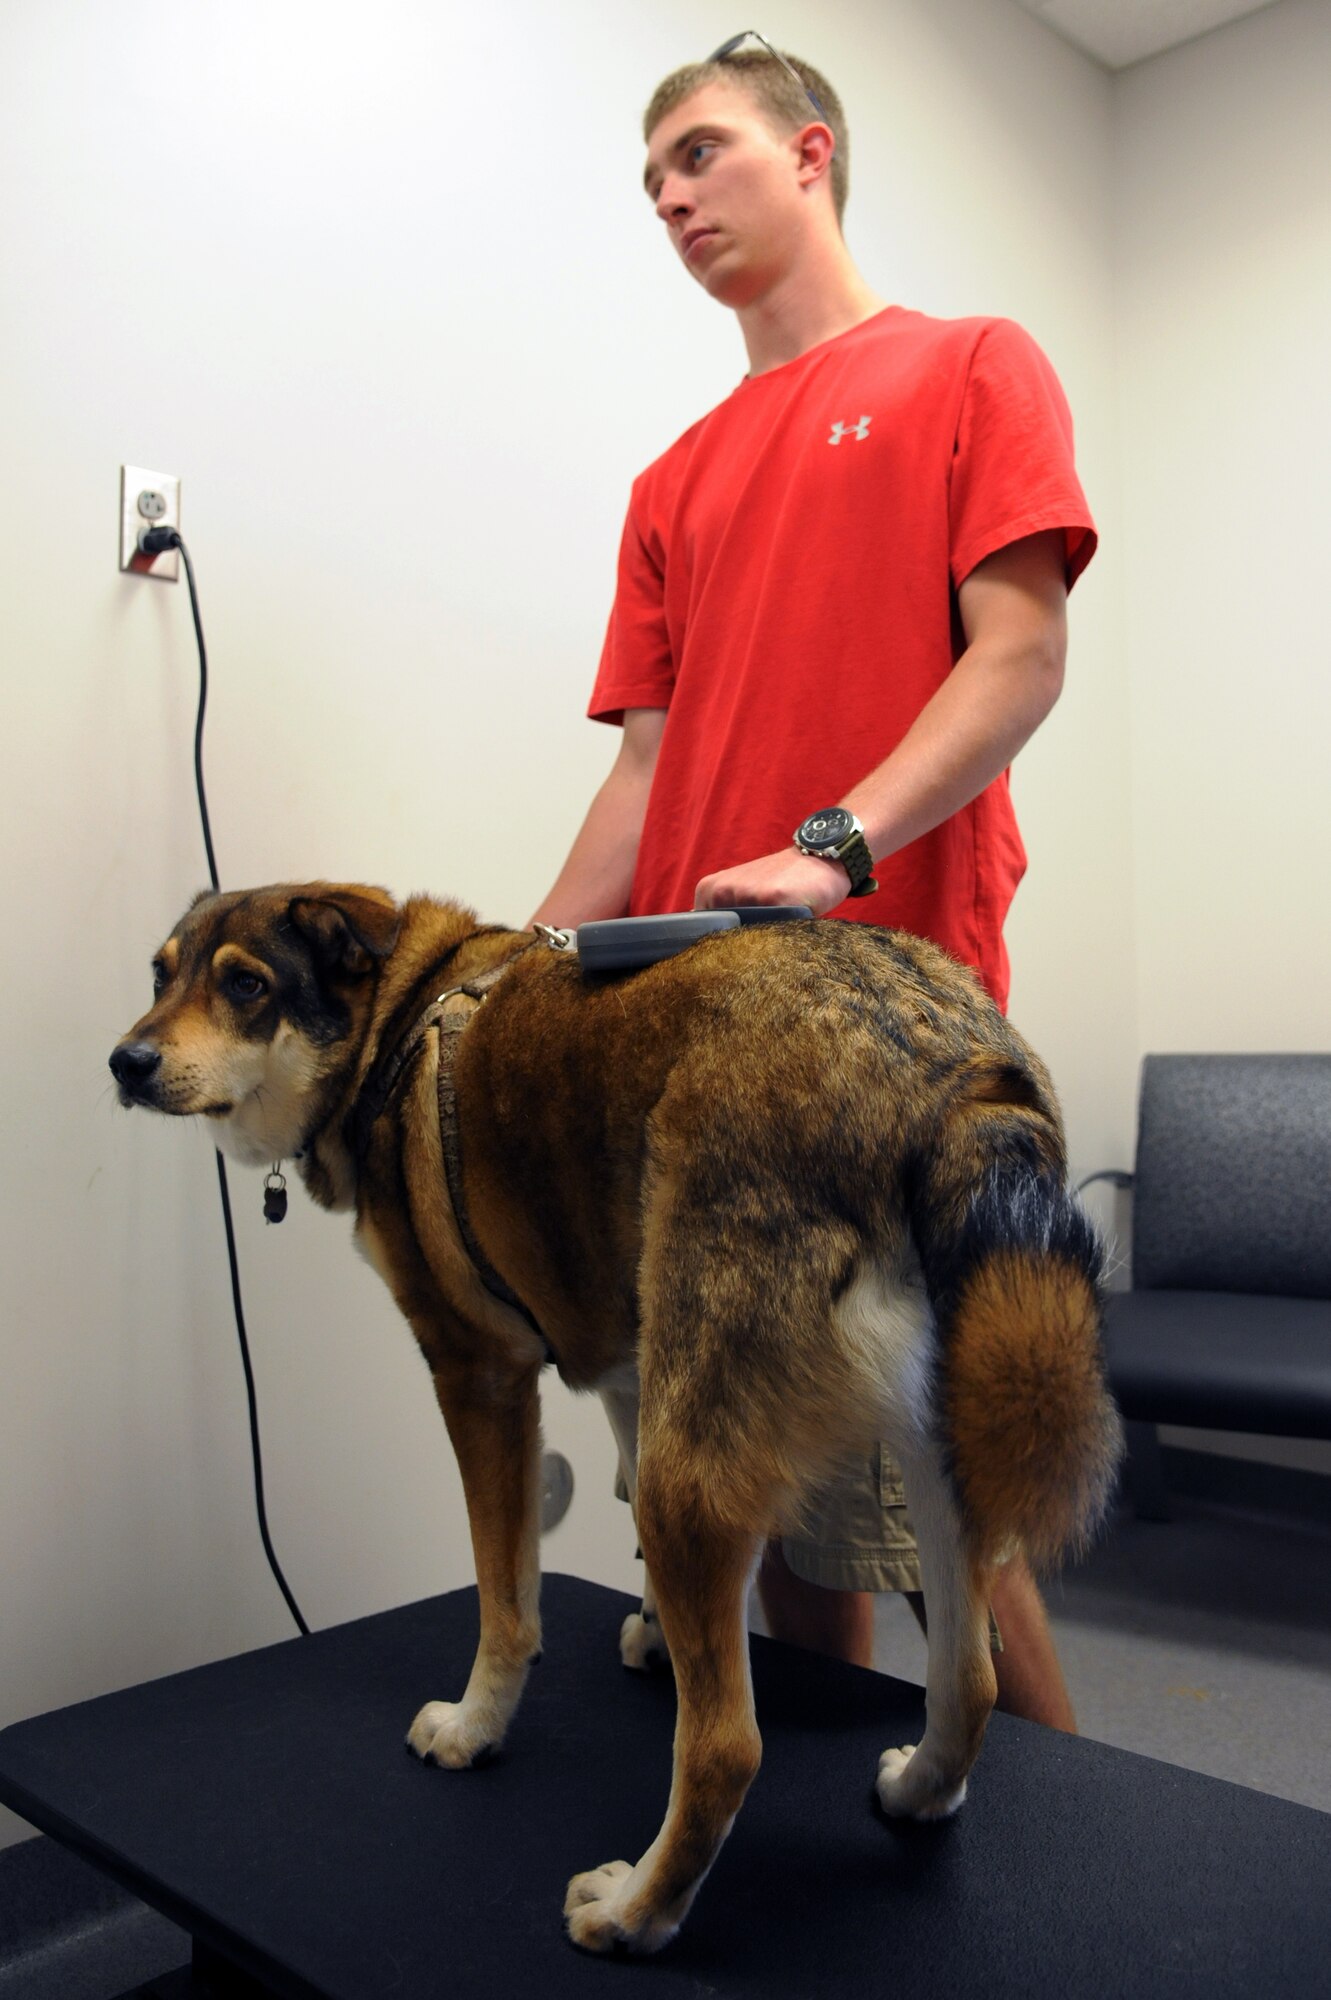 Senior Airman Chase Good, 509th Munitions Squadron, and his dog Neiko, wait for the results of a blood test at Whiteman Air Force Base, Mo., July 3, 2013. Neiko was being tested for heartworms upon his return from Alaska. (U.S. Air Force photo by Airman 1st Class Shelby R. Orozco/Released)